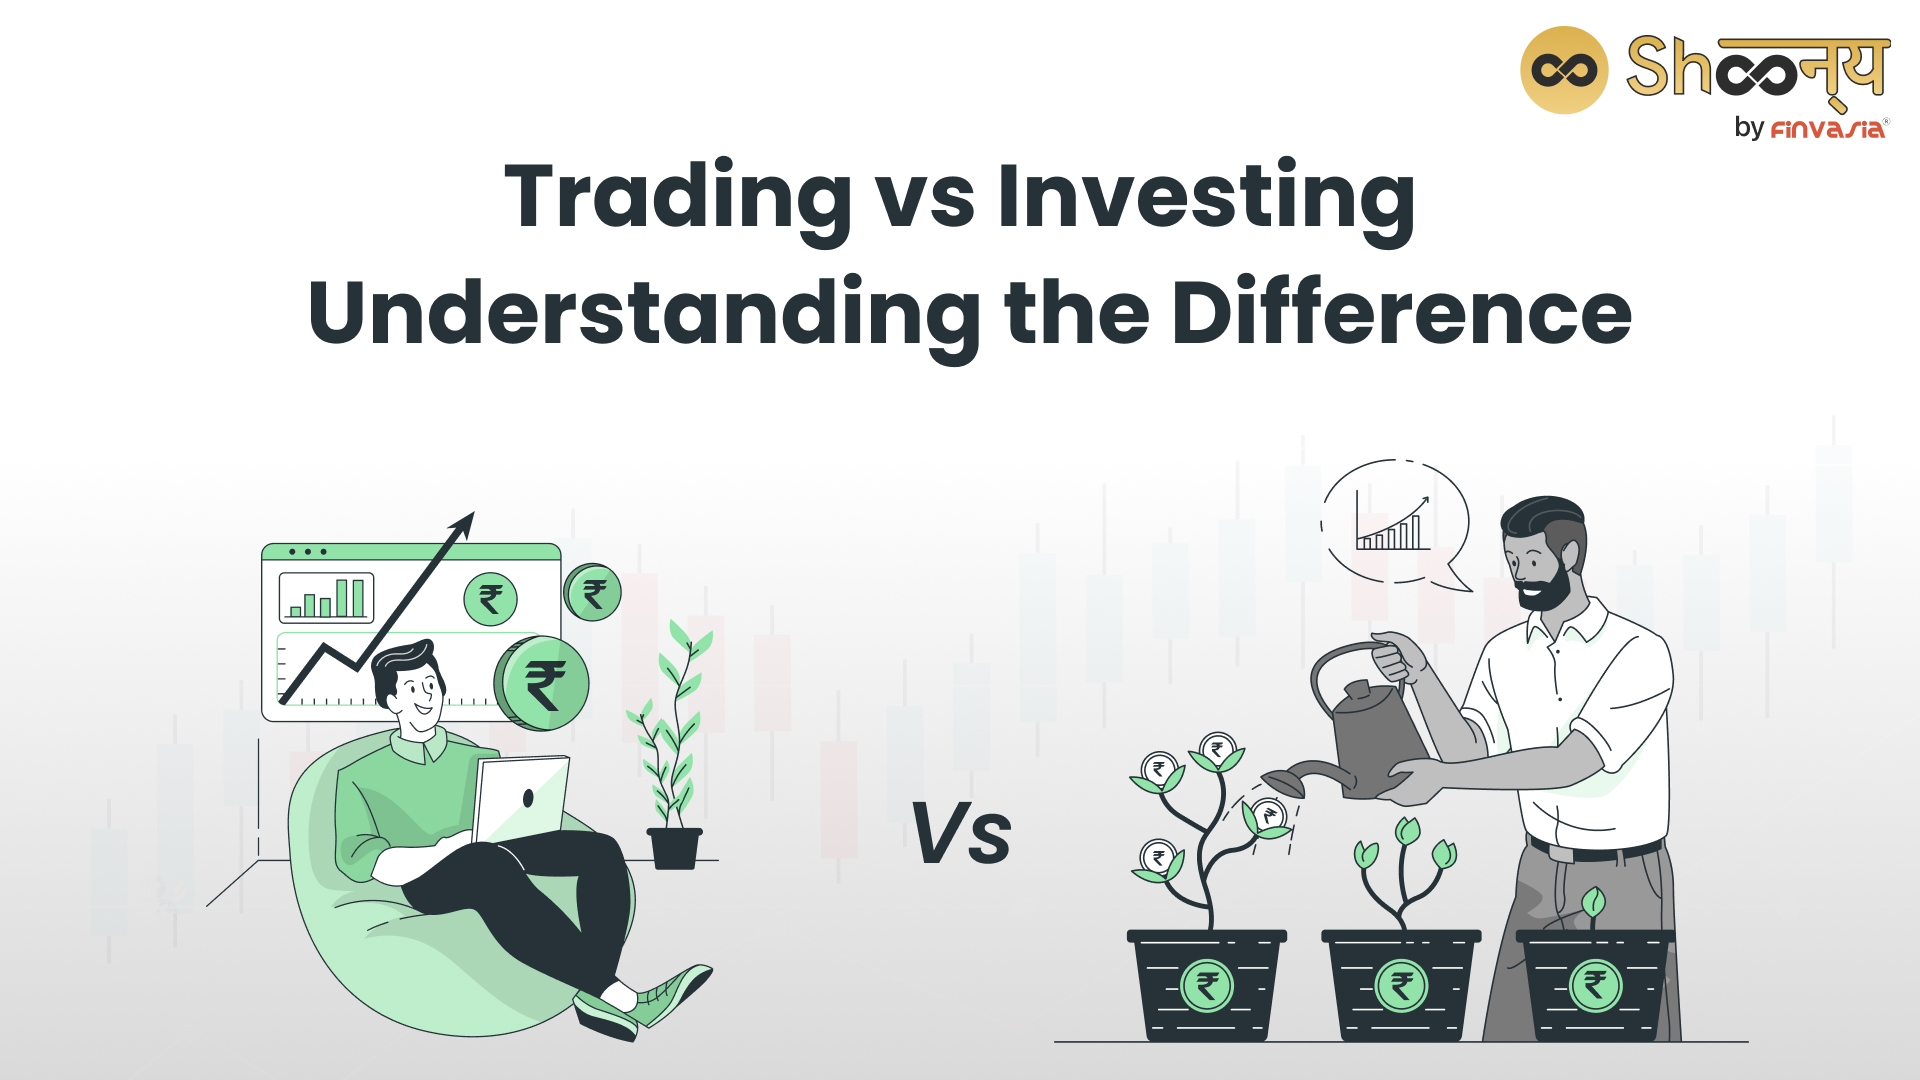 Trading vs Investing: What's the Best Approach for You?